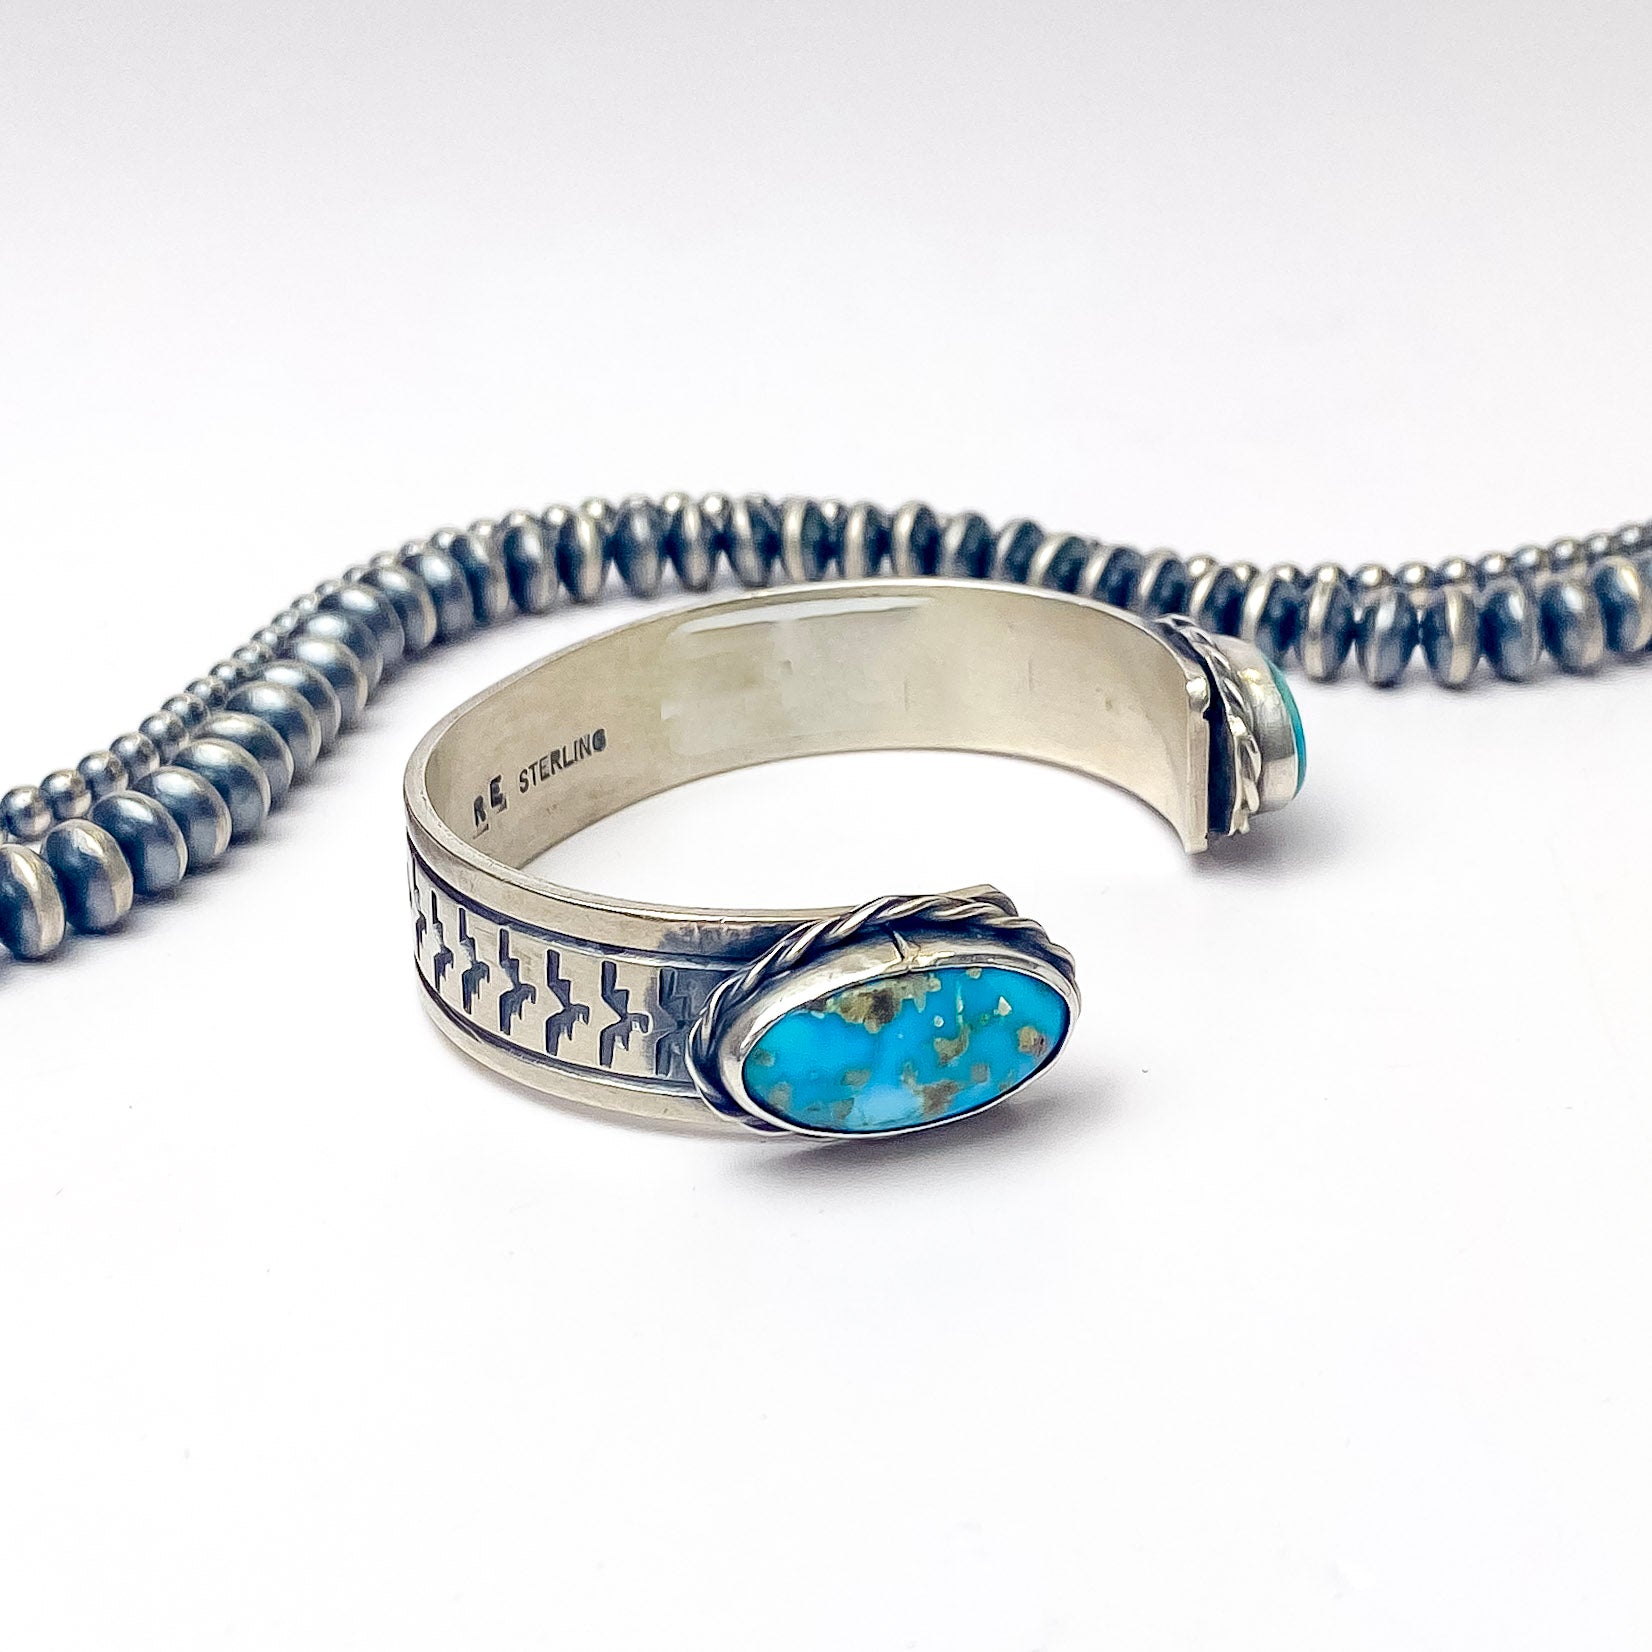 Rick Enriquez | Navajo Handmade Detailed Sterling Silver Open Cuff Bracelet with Blue Ridge Turquoise Stones - Giddy Up Glamour Boutique